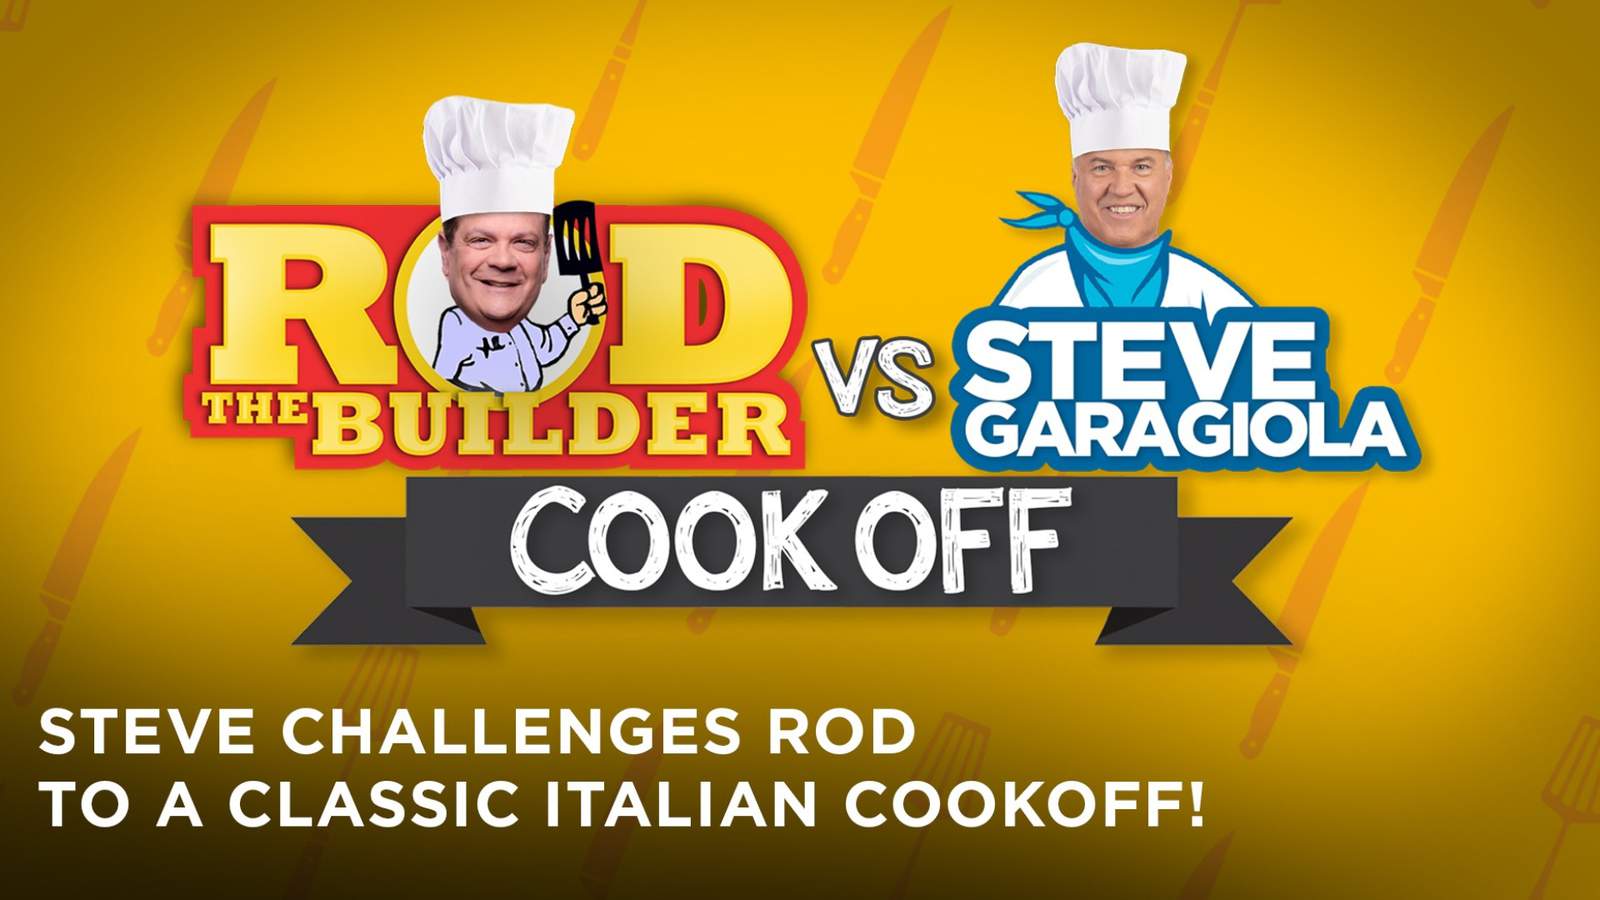 Rod the Builder competes against Steve Garagiola in Friday’s challenge